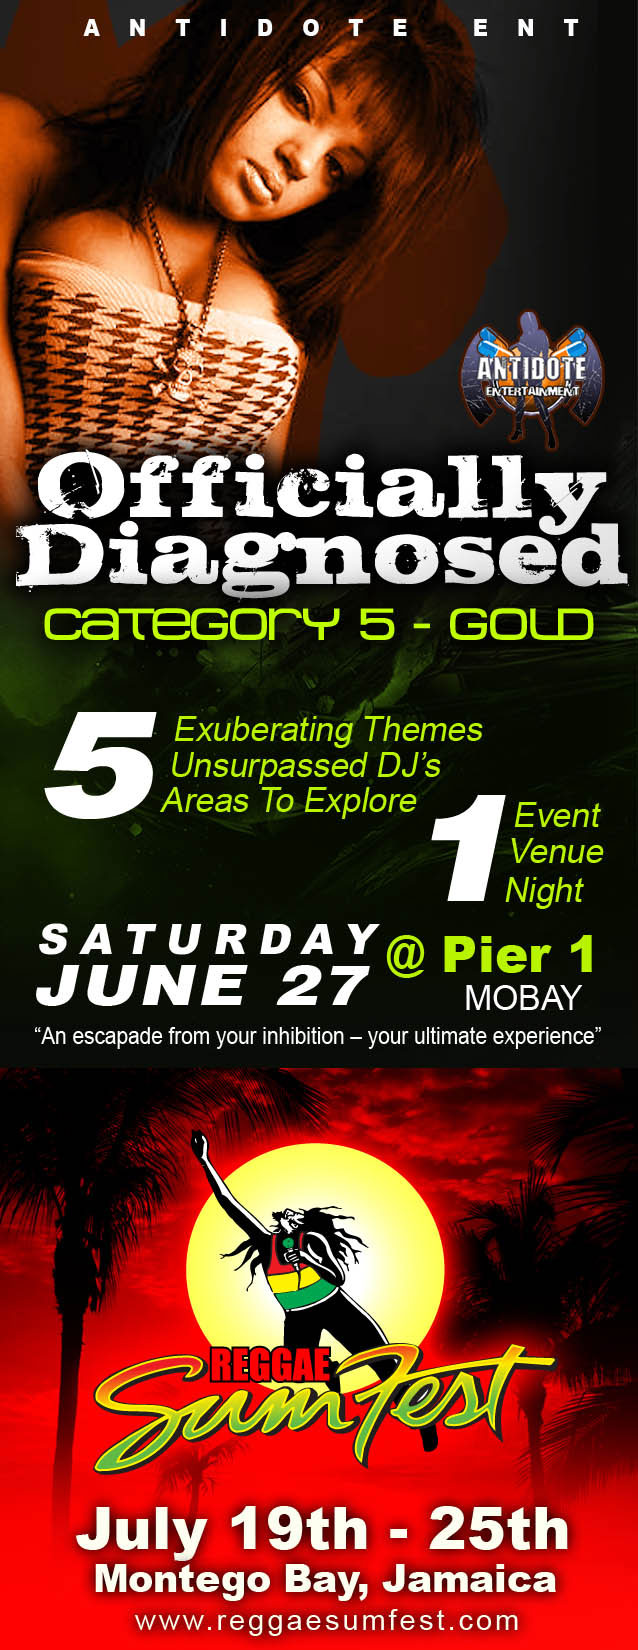 Officially Diagnosed Flyer - Reggae Sumfest 2009 Recommended Event - NegrilTravelGuide.com...!